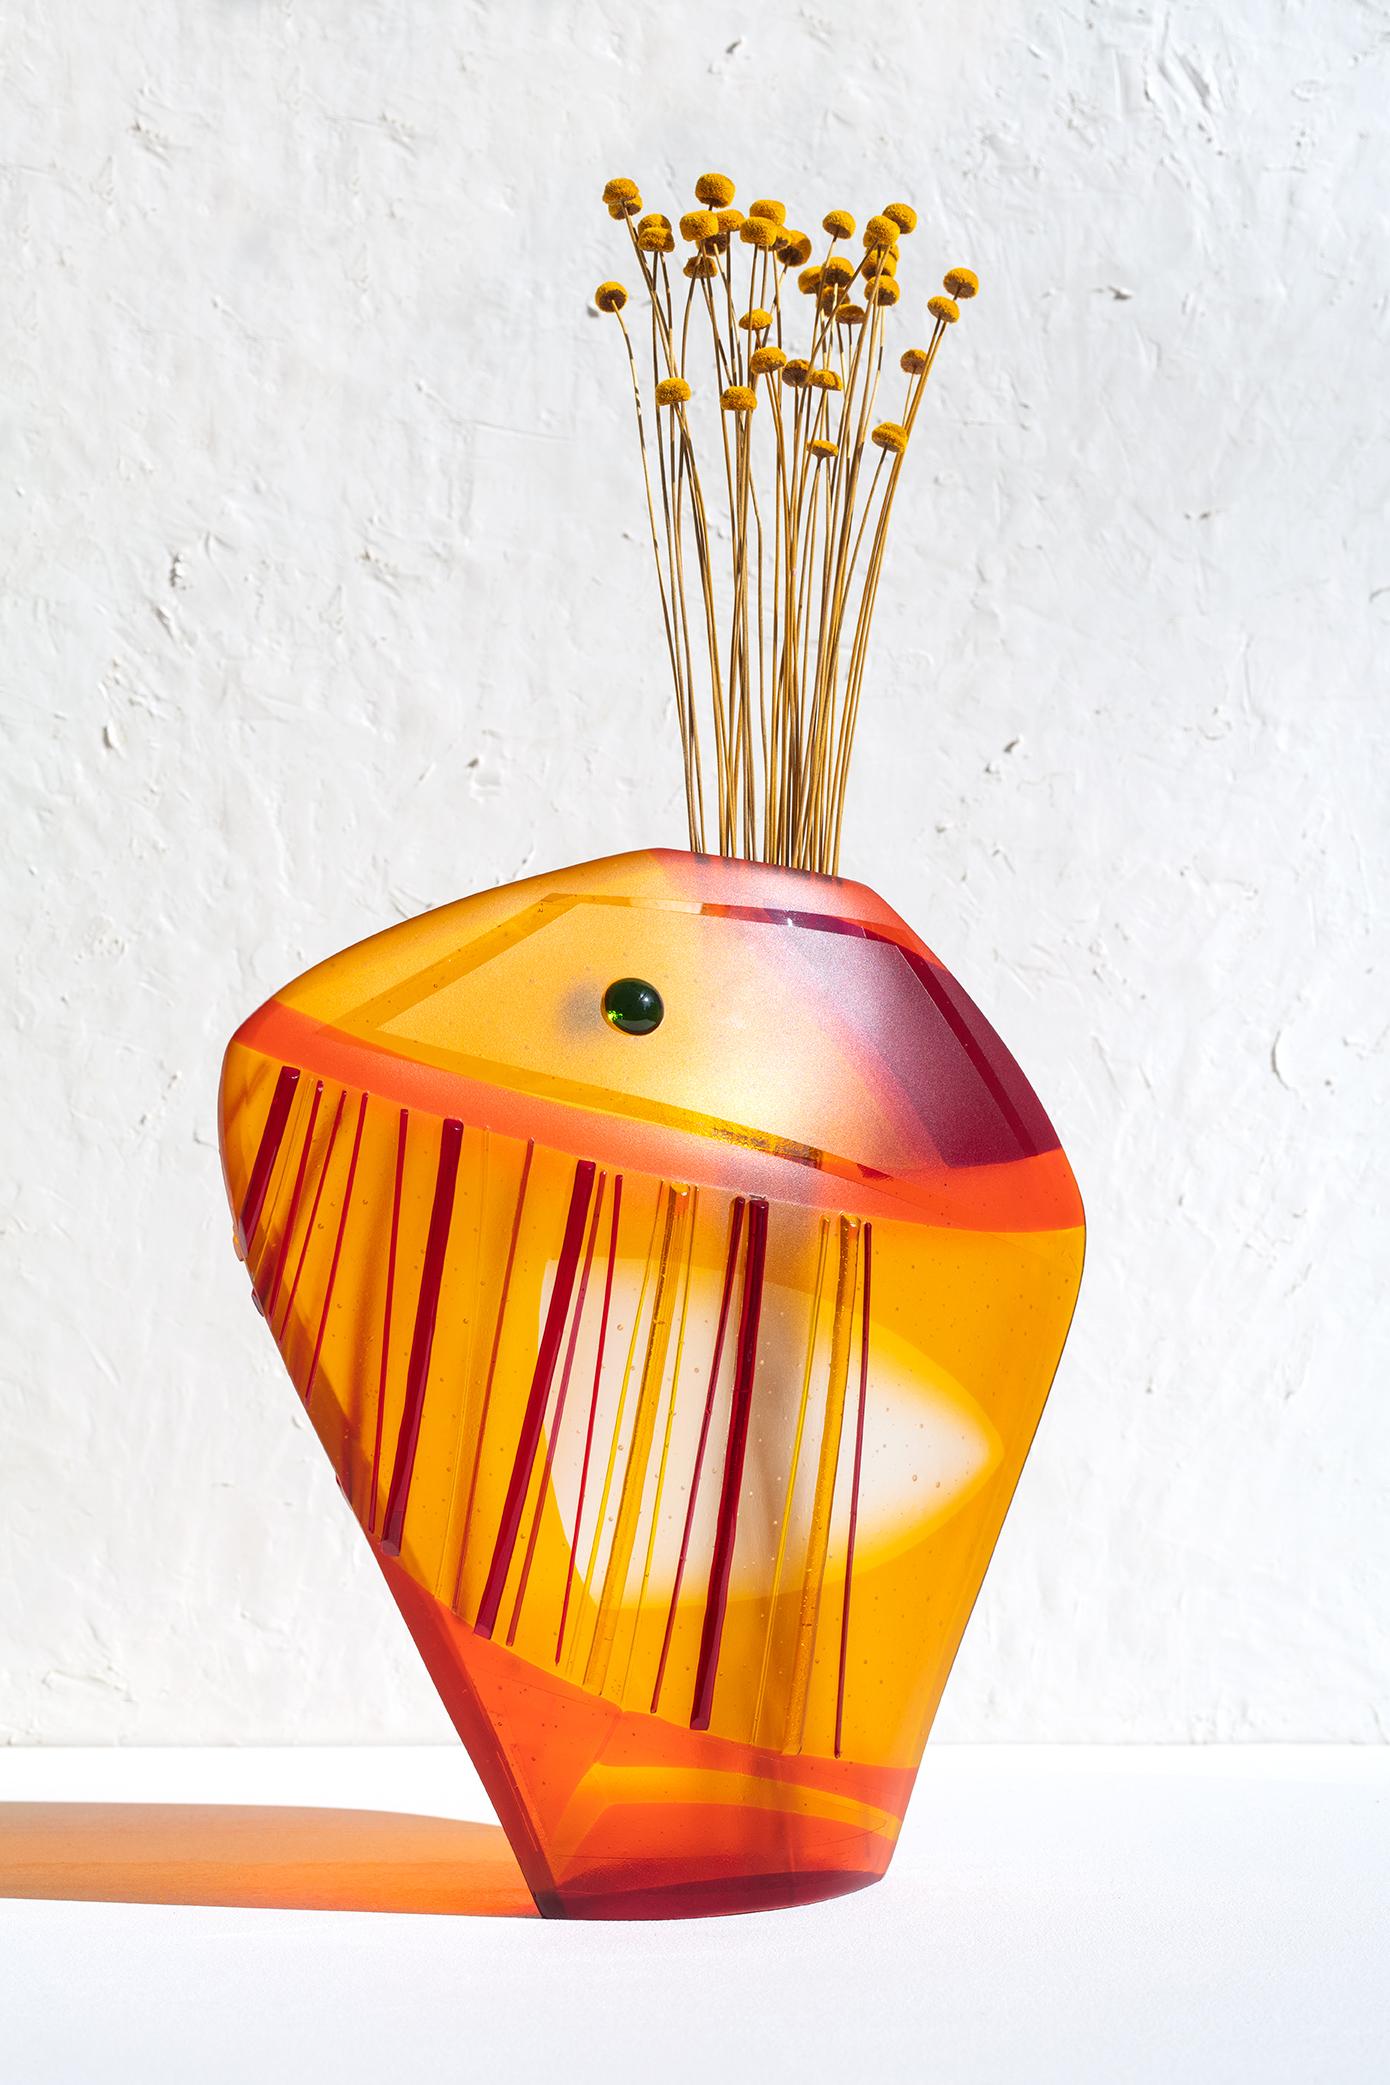 The graphic artist Delia Ruiz Malo challenged 40Plumas to create a glass sculpture inspired by her illustrations. They immediately fell in love with her work “Colorful Fish” and decided to work on a detail of warm tones. Giving the image the